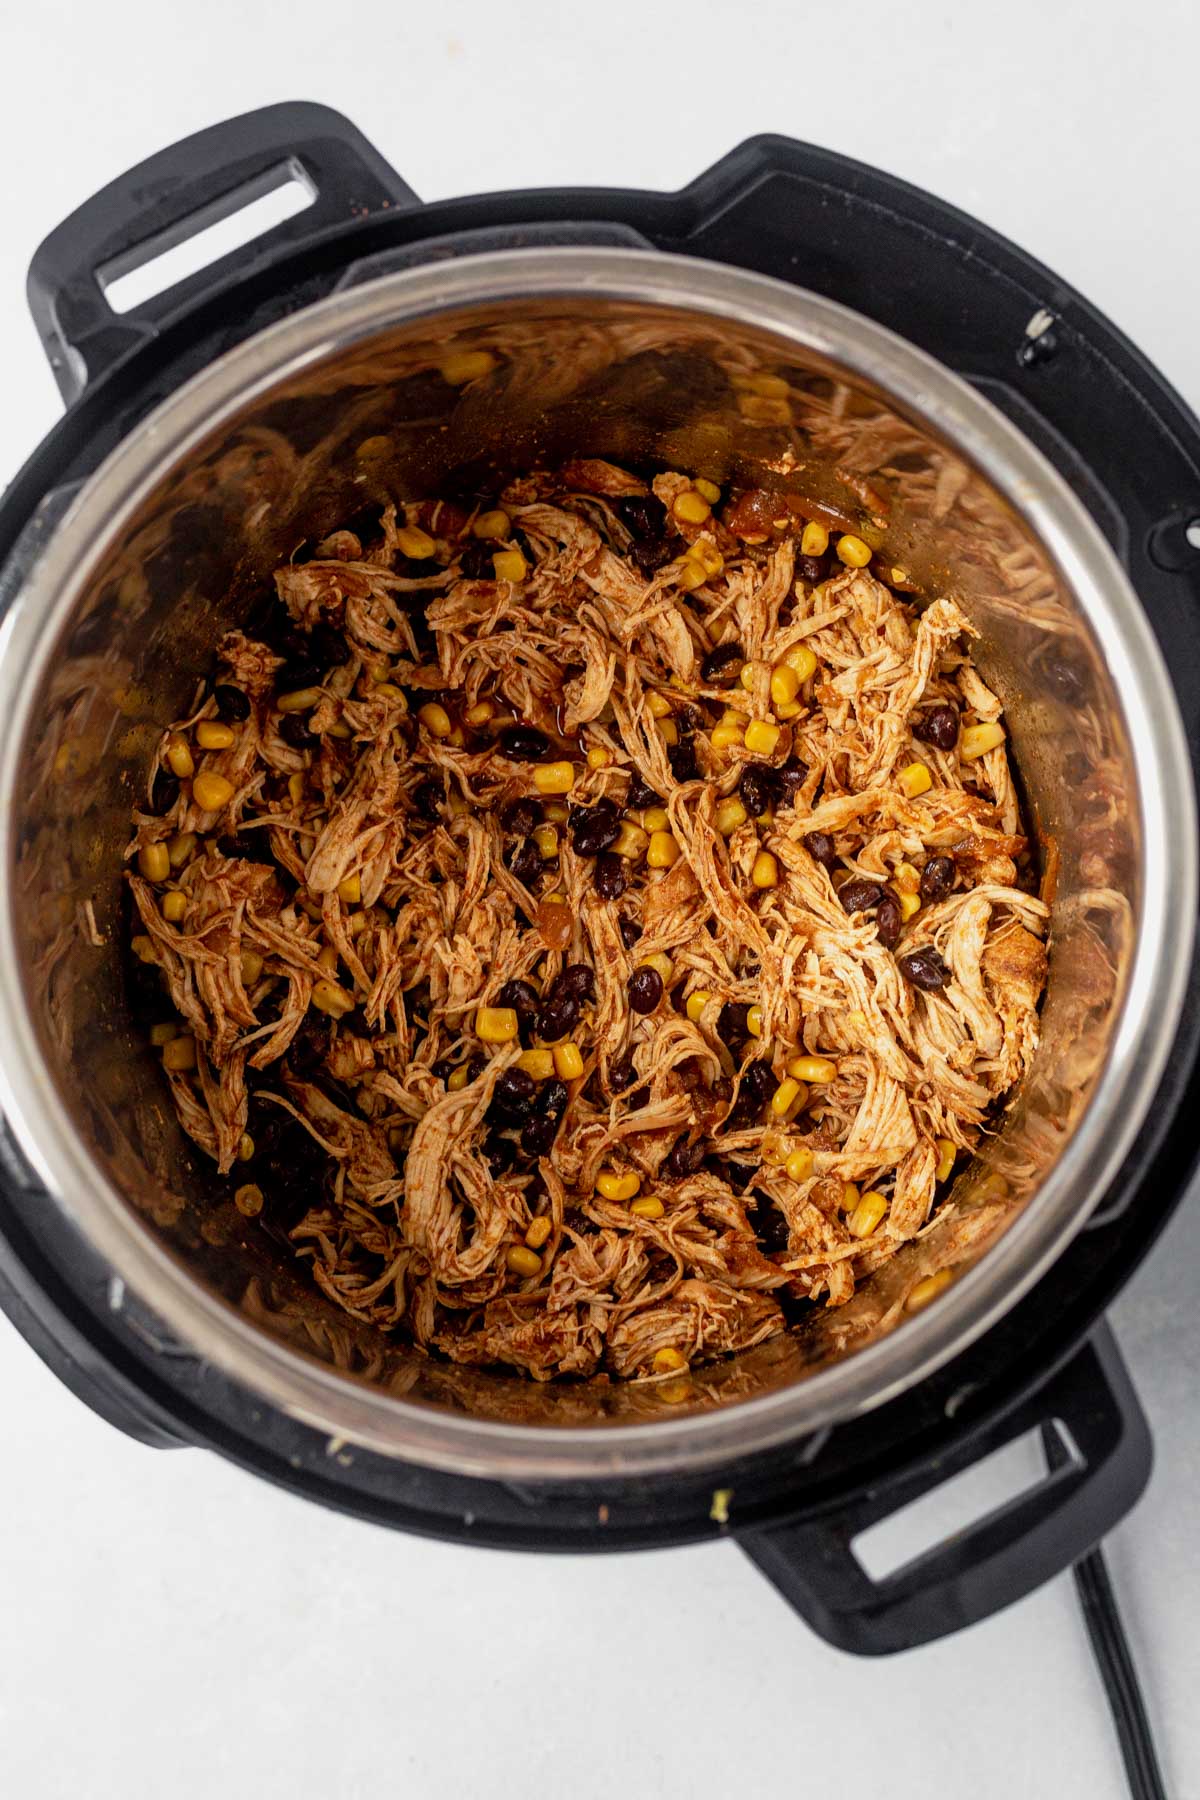 Shredded chicken, corn and black beans in the Instant Pot with enchilada sauce